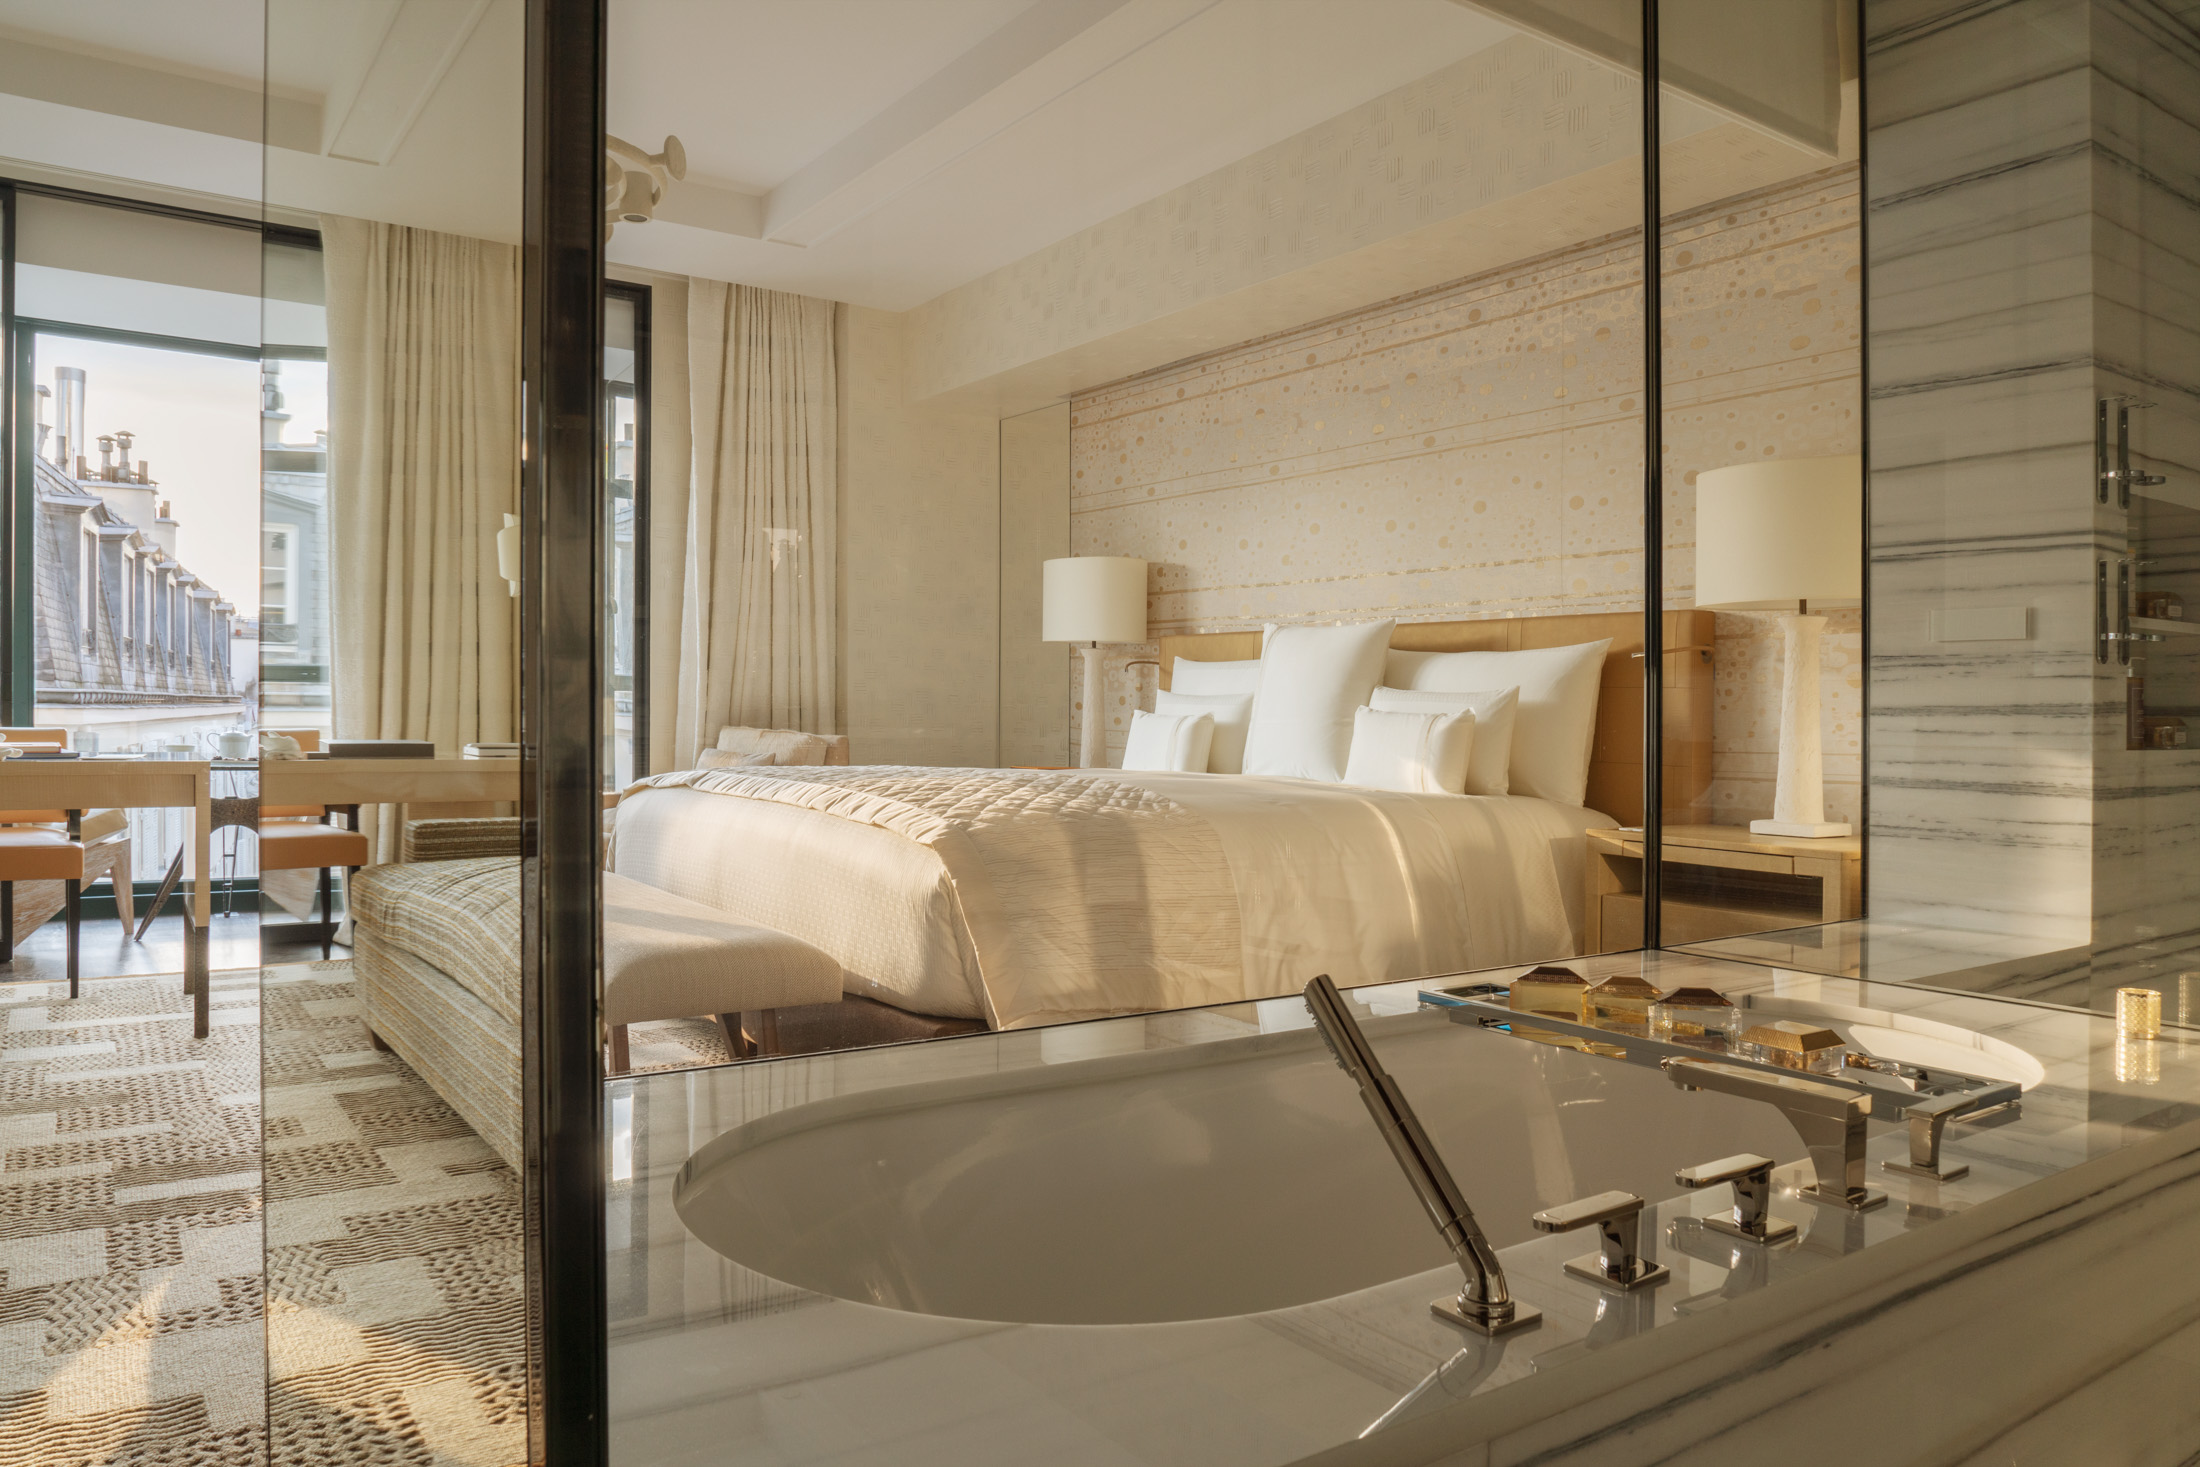 A room at the Cheval Blanc Paris, which was given three keys in Michelin’s first hotel awards